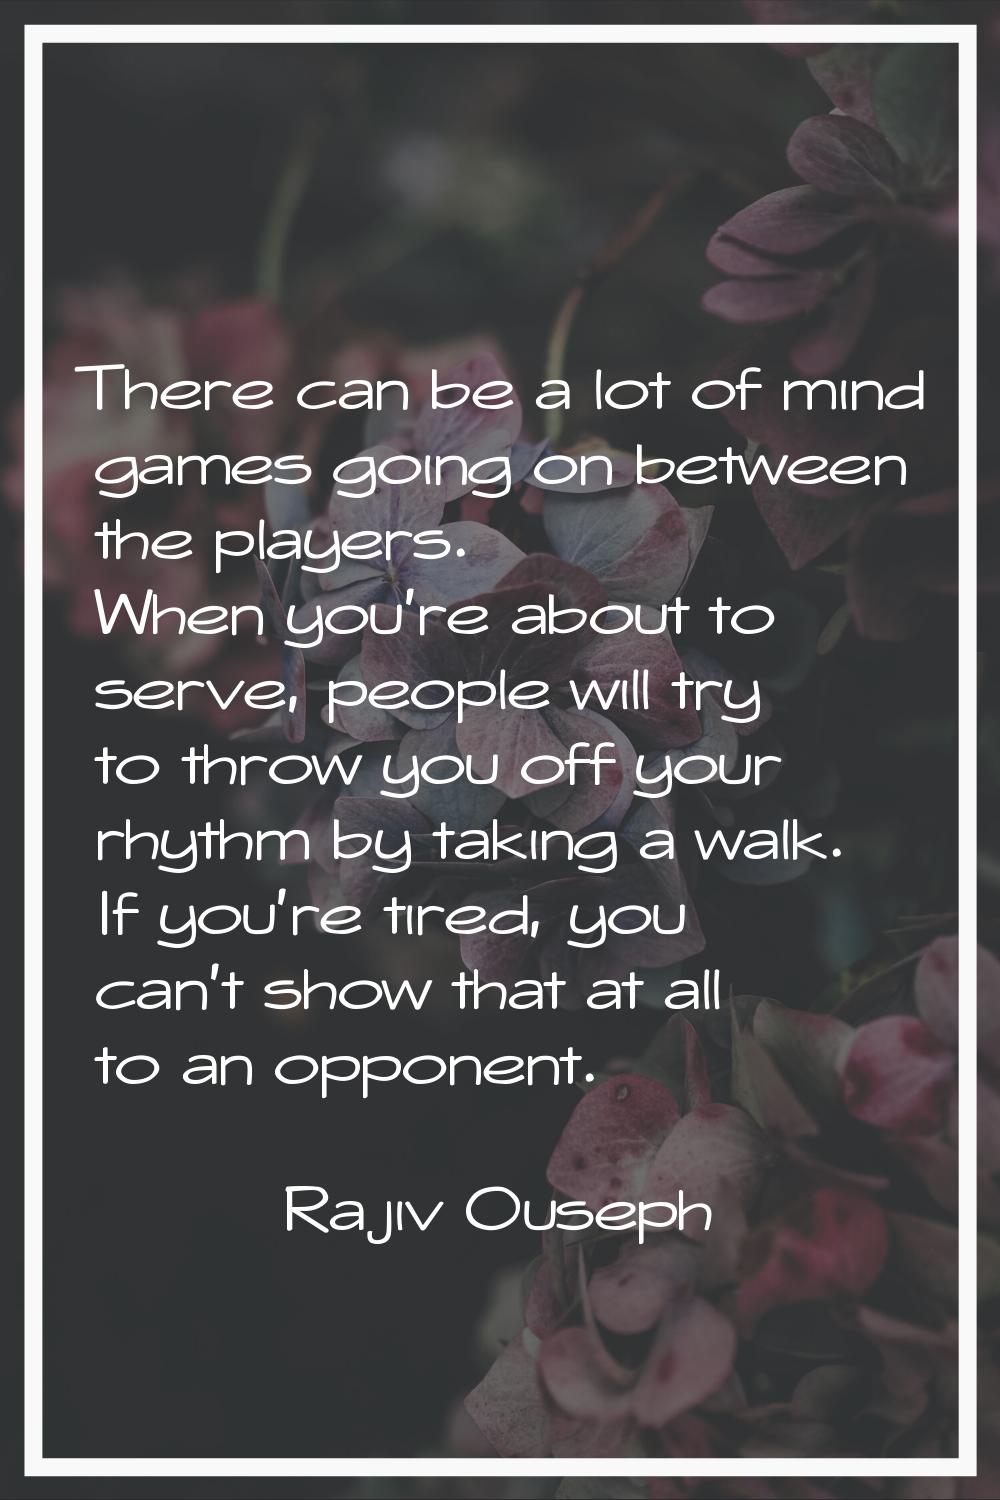 There can be a lot of mind games going on between the players. When you're about to serve, people w